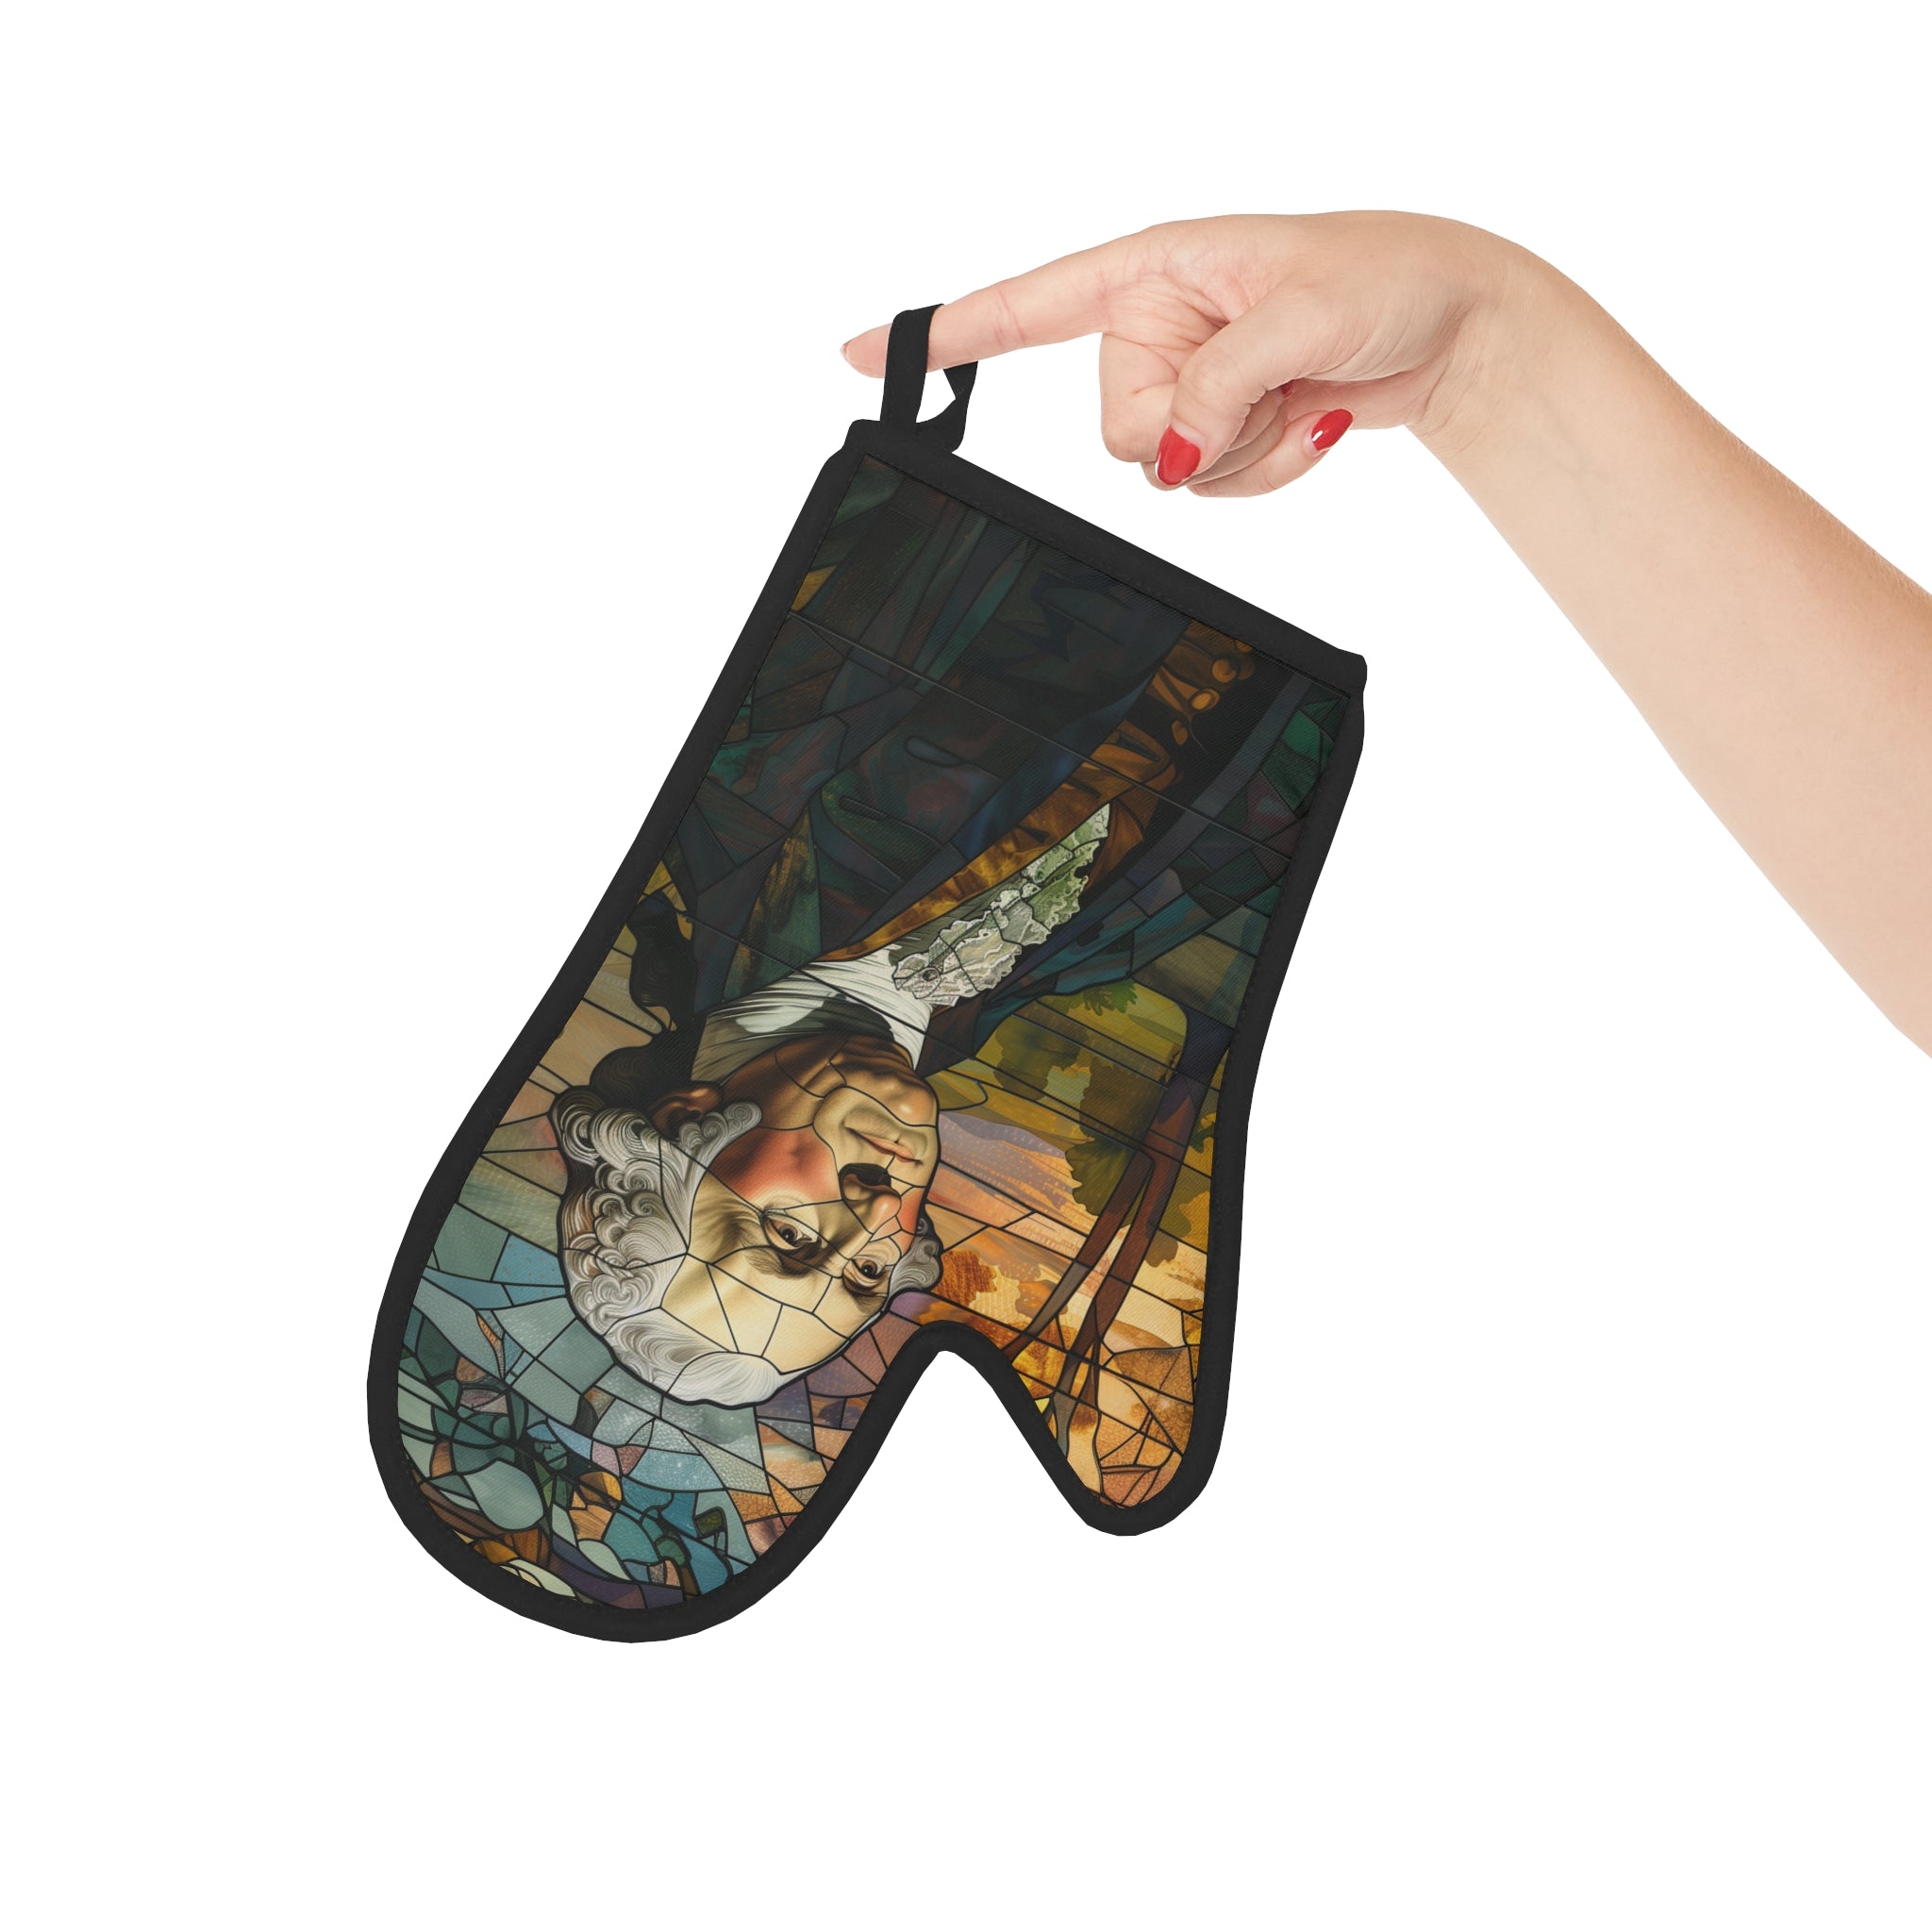 George Washington Stained Glass Oven Mitt